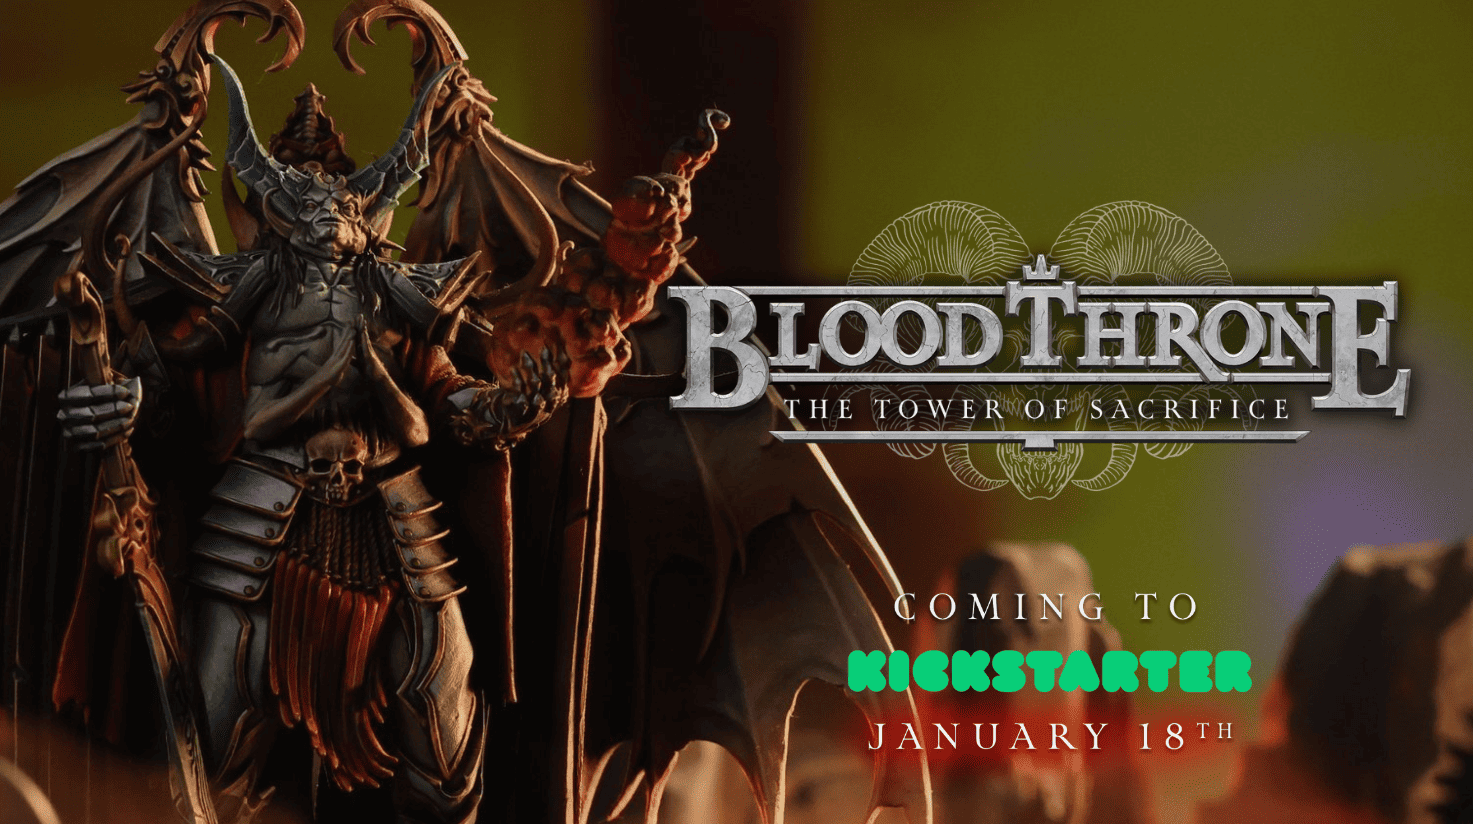 Blood Throne The Tower of Sacrifice feature